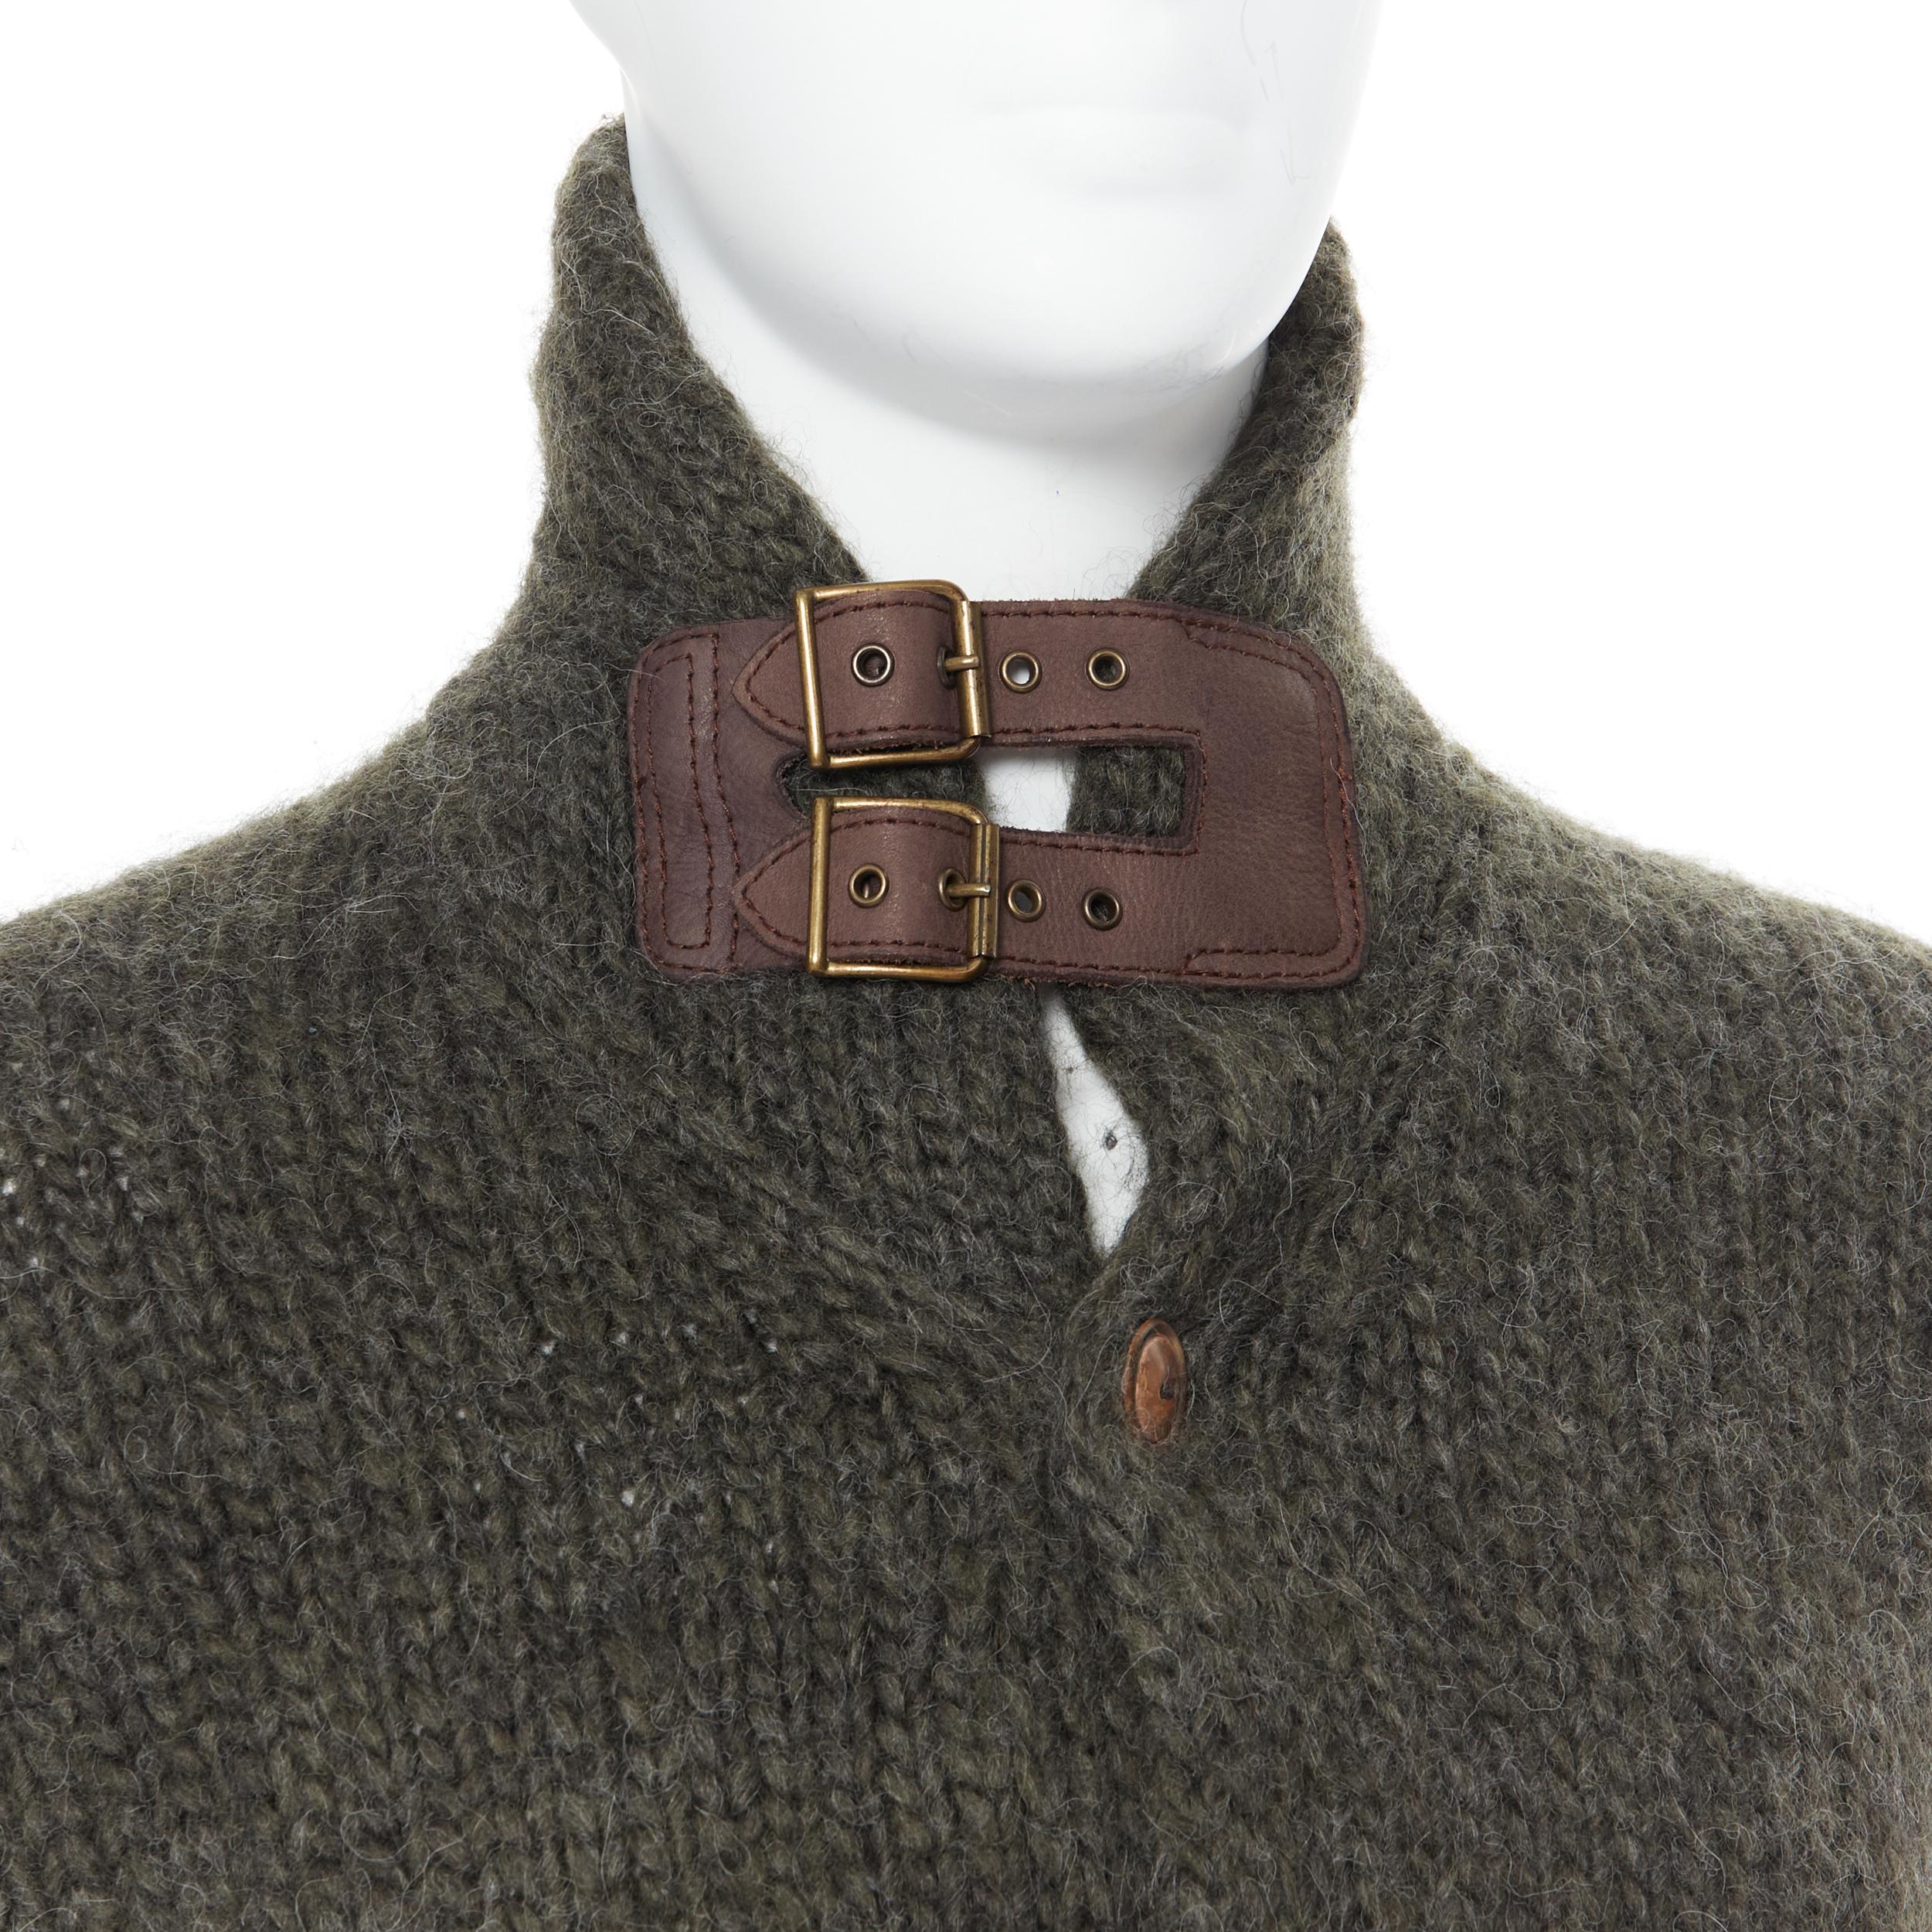 POLO RALPH LAUREN wool alpaca hand knit leather buckle cardigan jacket S Reference: PRCN/A00030 
Brand: Ralph Lauren 
Material: Wool 
Color: Green 
Pattern: Solid 
Closure: Button 
Extra Detail: Alpaca wool blend. Hand knit. Leather buckle design at